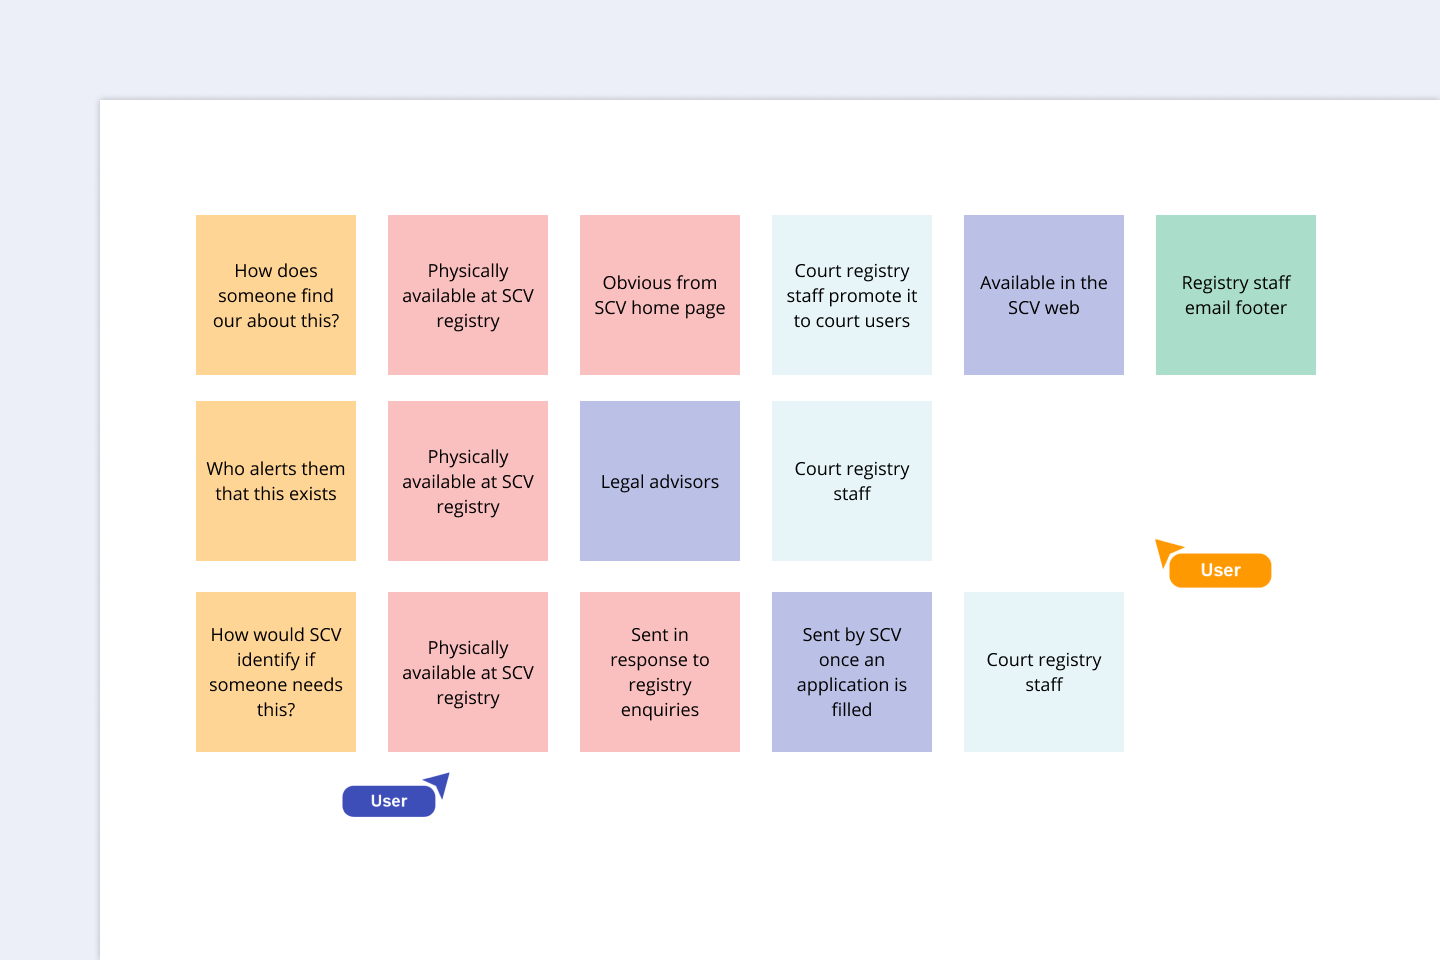 An image of an online collaborative tool being used for ideation as part of the co-design process.
